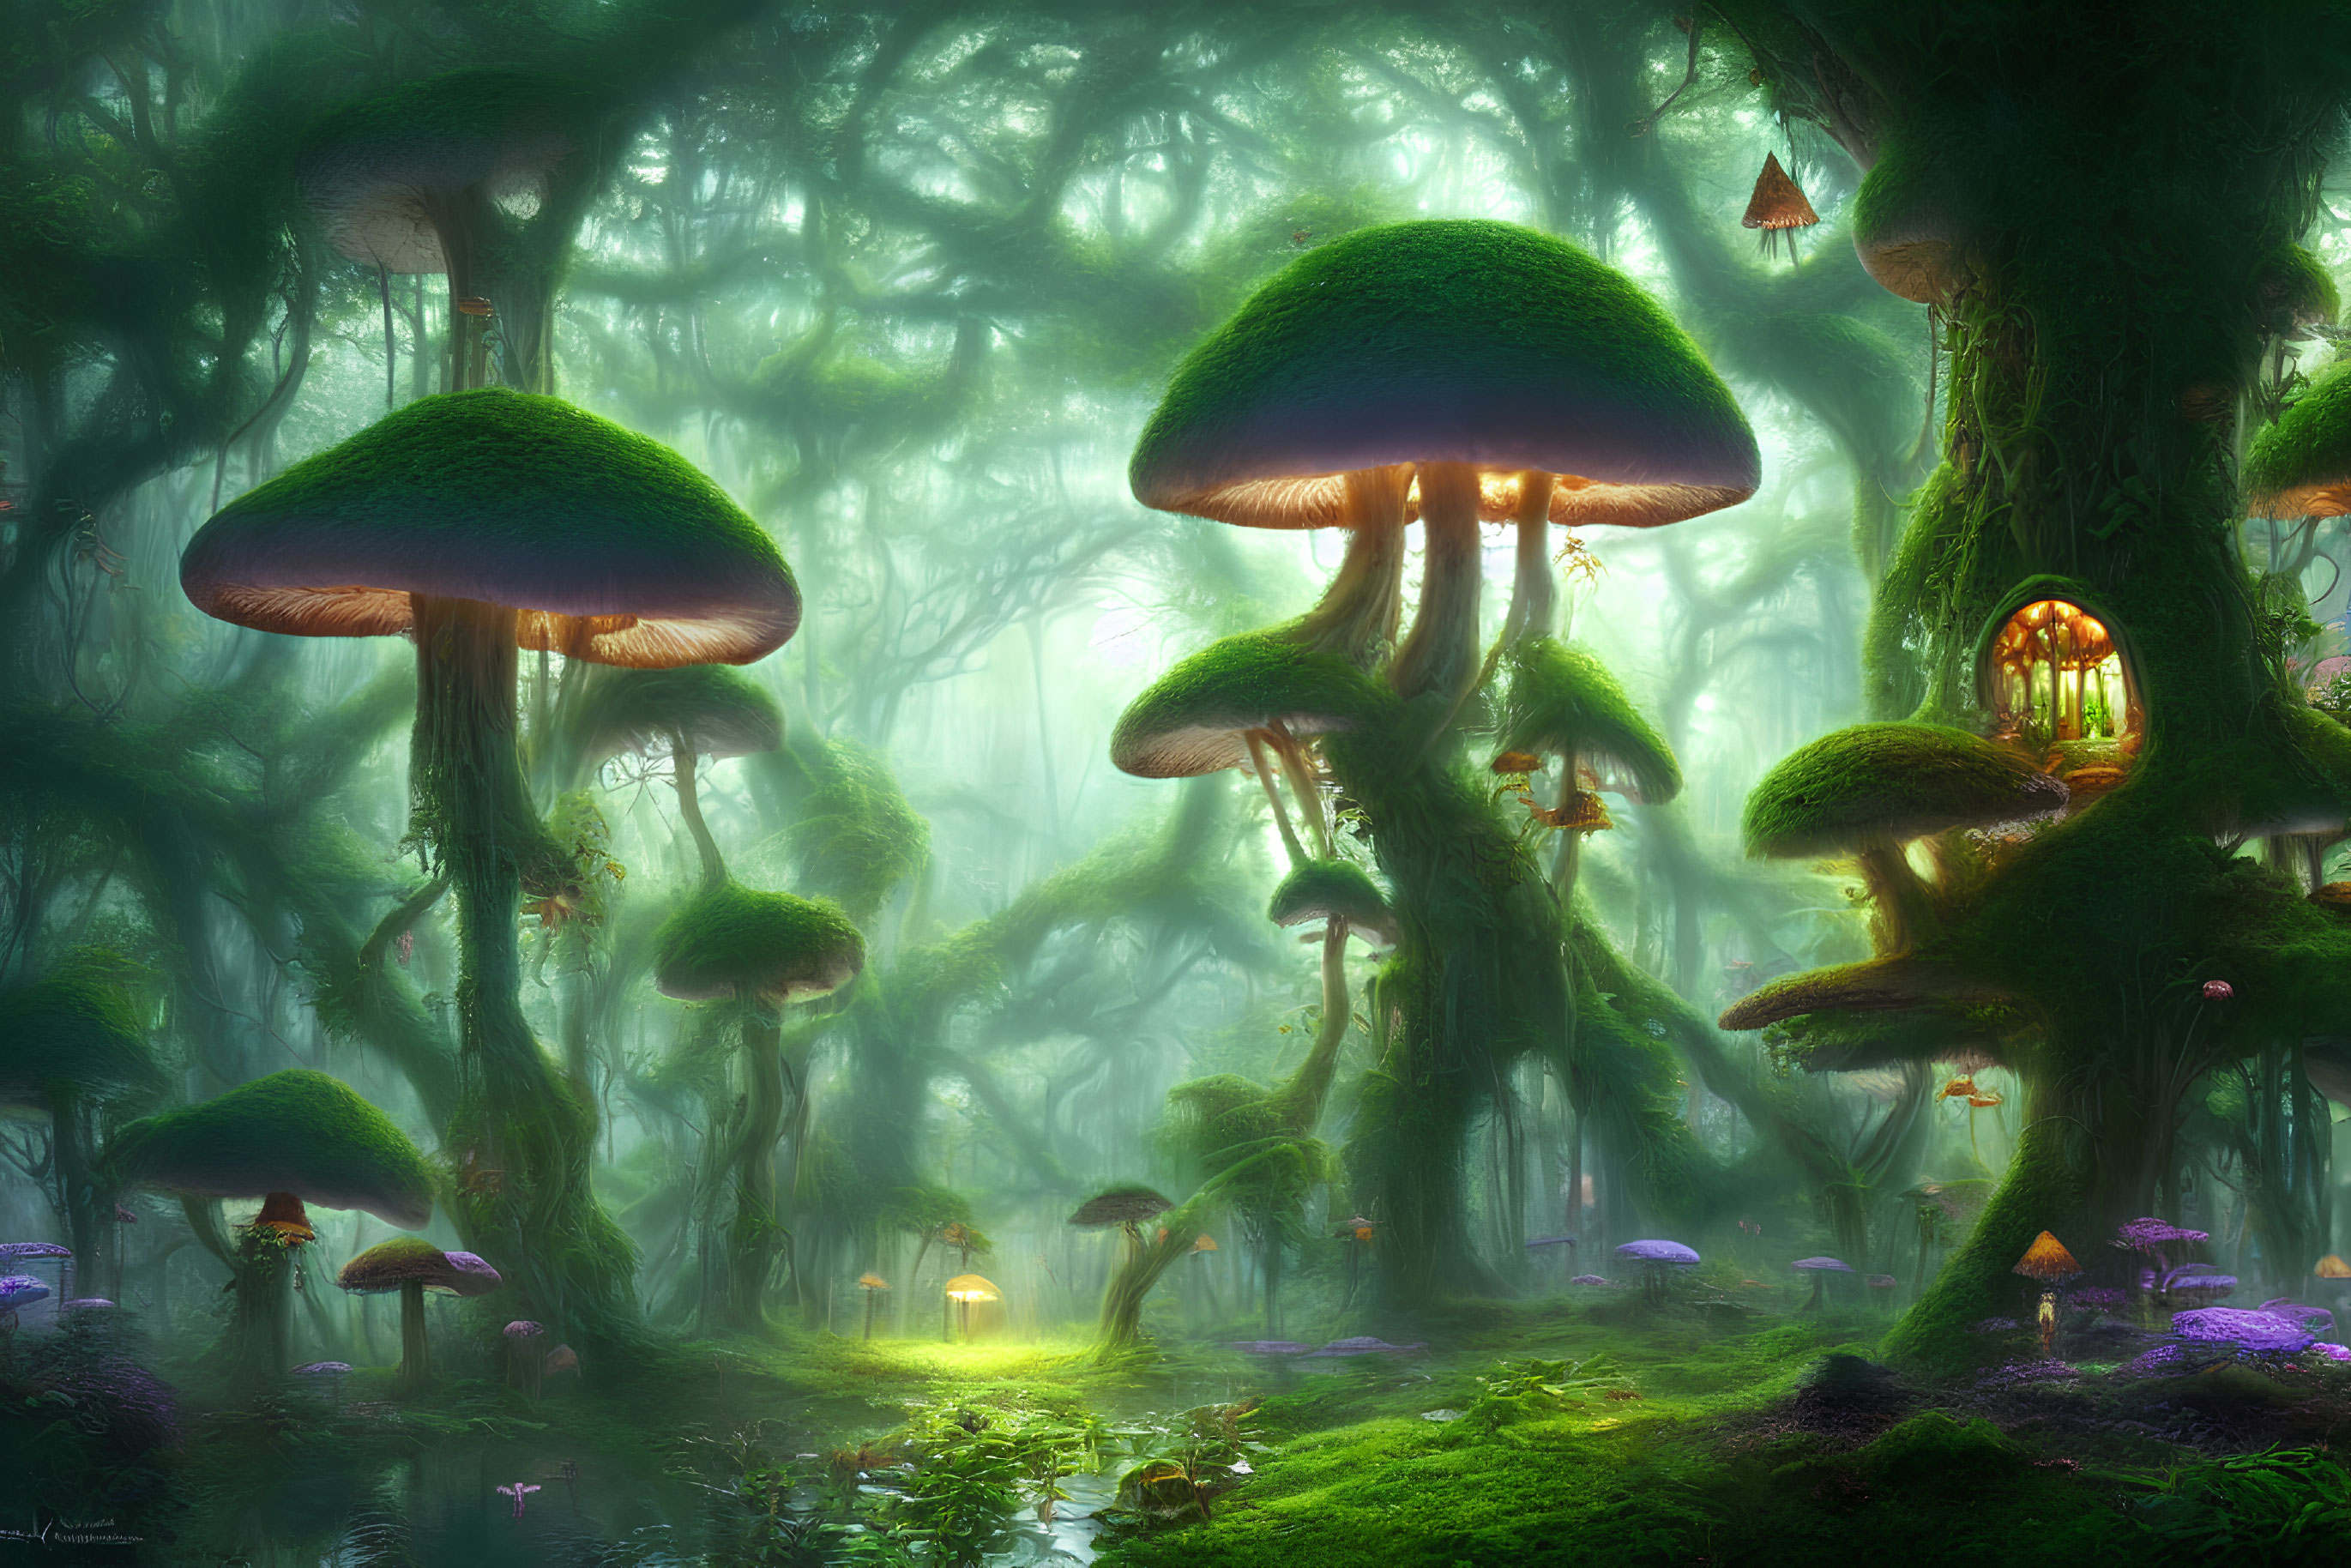 Enchanted forest with oversized glowing mushrooms and lantern lights